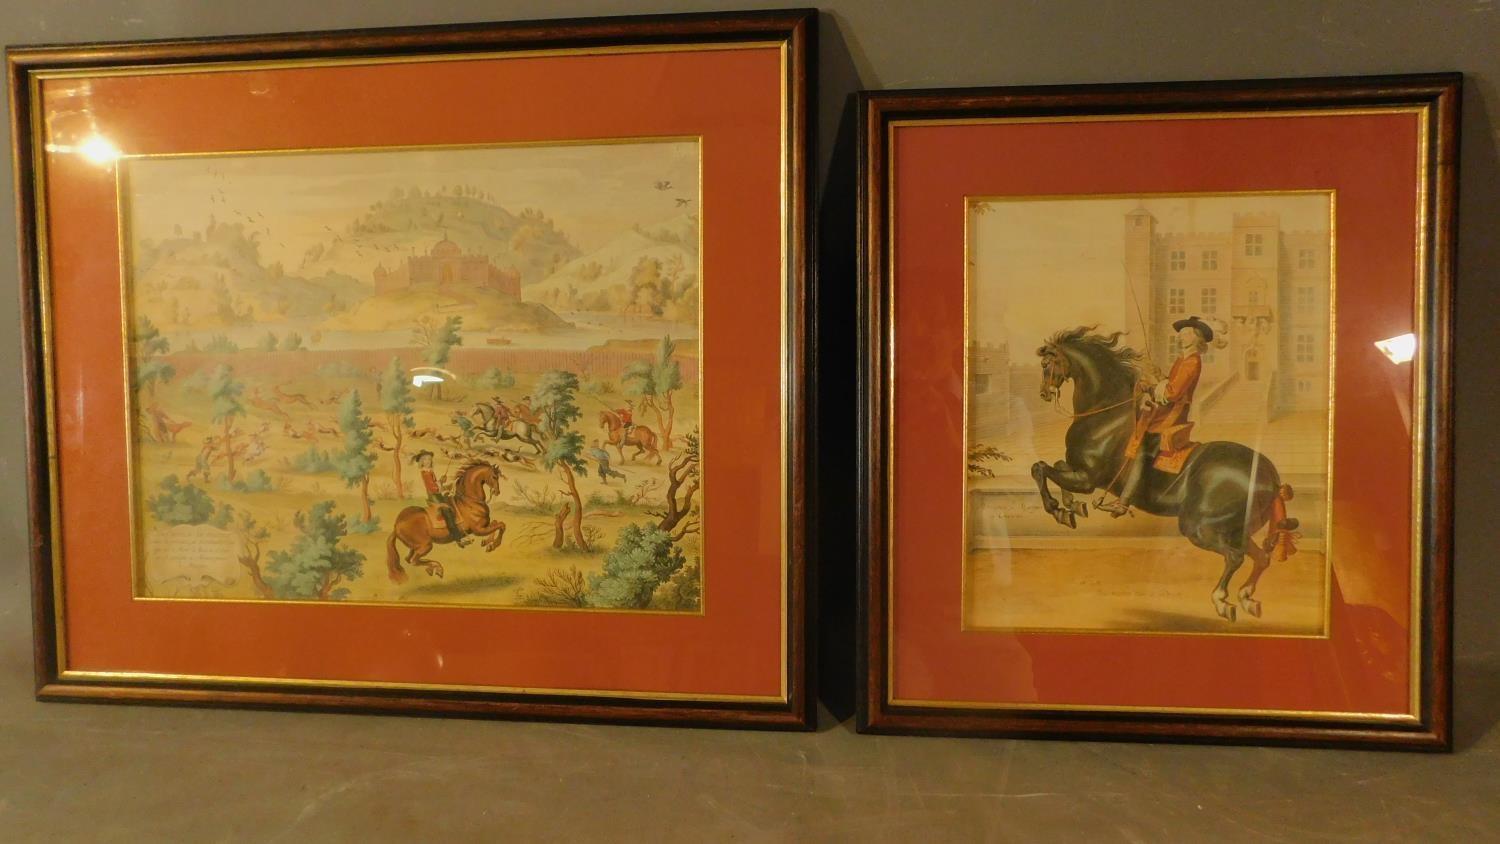 Two framed and glazed prints, each depicting cavaliers on horseback. H.64 W.75cm (largest)